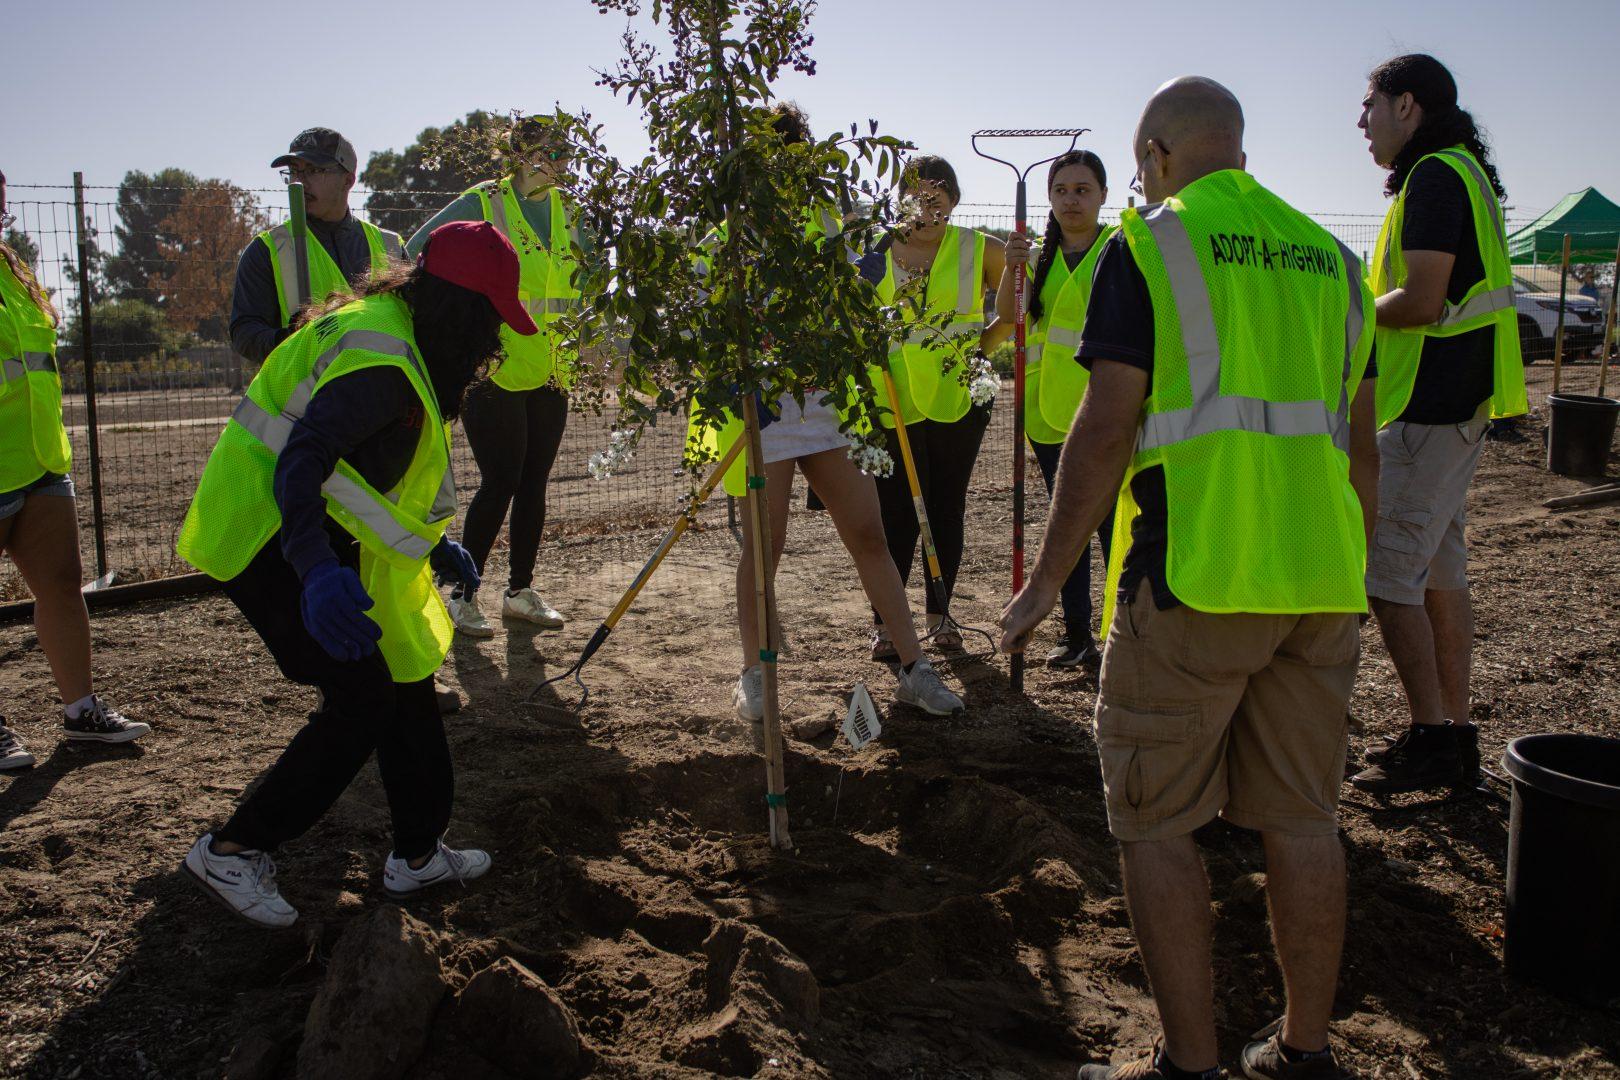 The event is a partnership between Fresno State and Tree Fresno as part of a multiple-phase plan to beautify the cam-
pus with more trees. The plan seeks to also improve the air quality of the campus. (Diego Vargas/The Collegian)